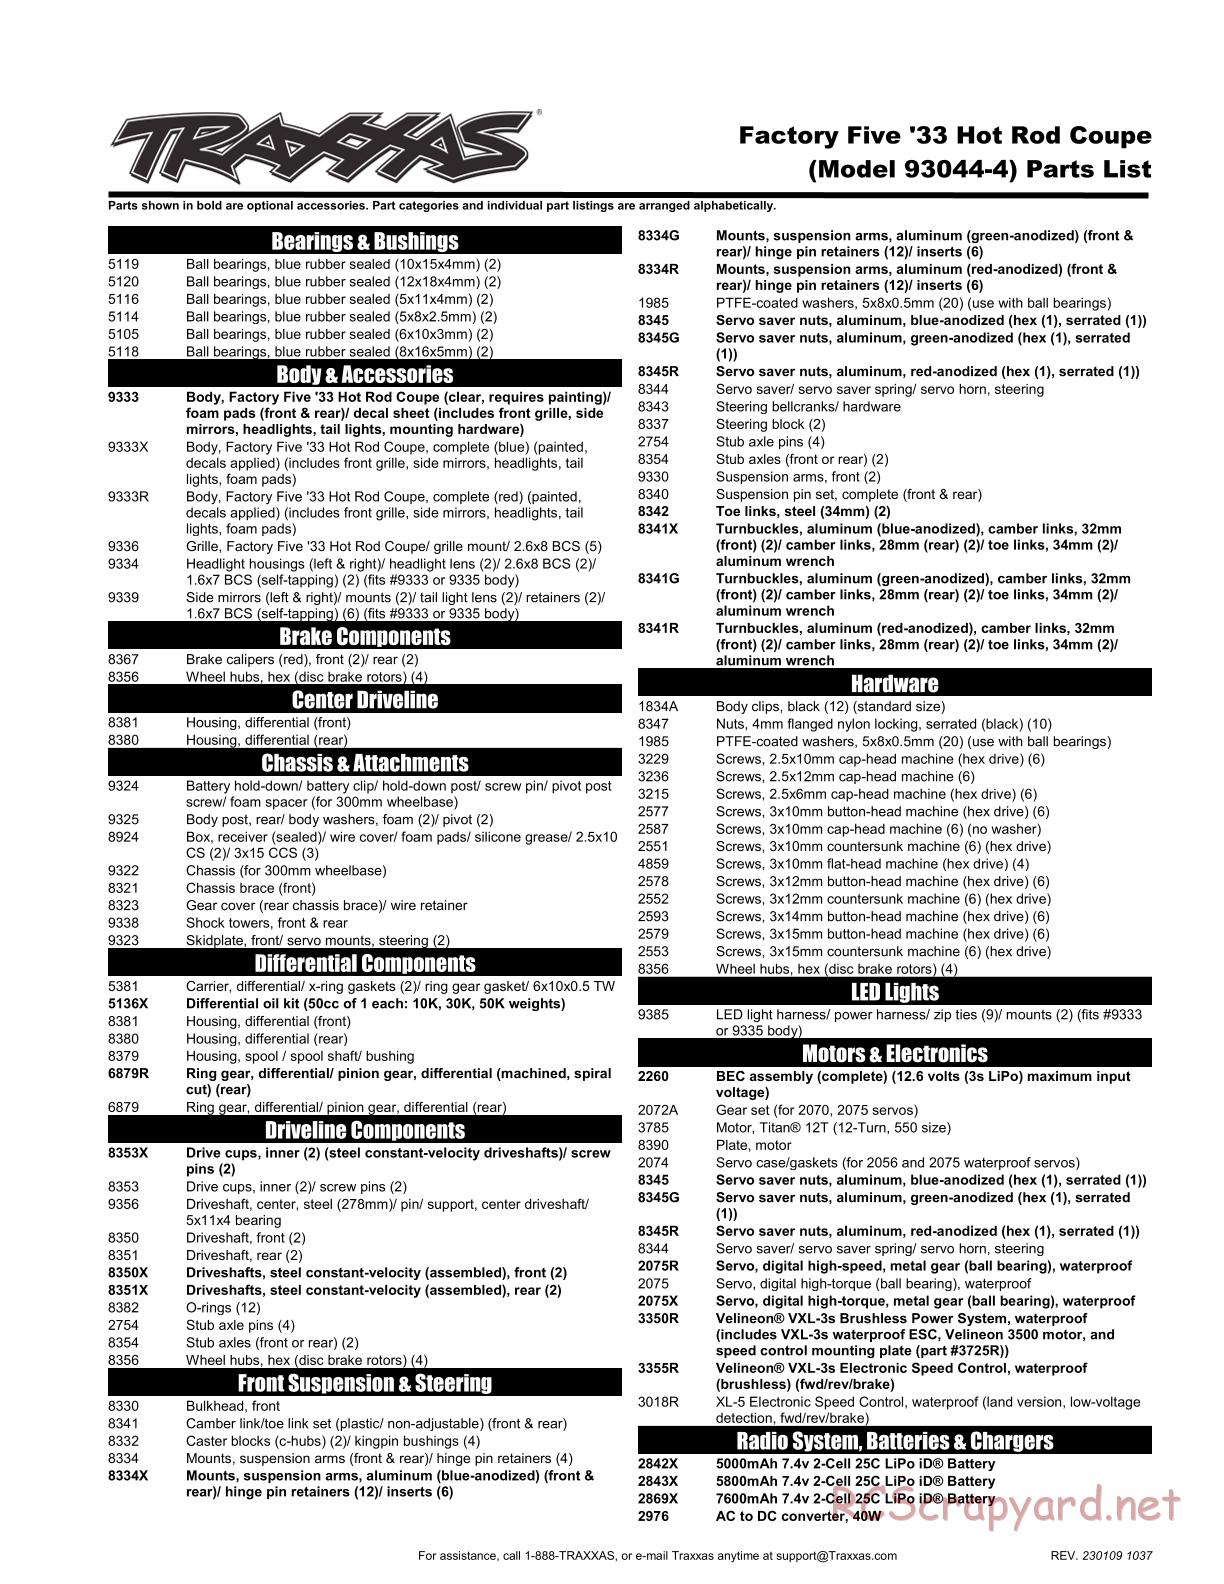 Traxxas - Hot Rod 1933 Coupe - Parts List - Page 1